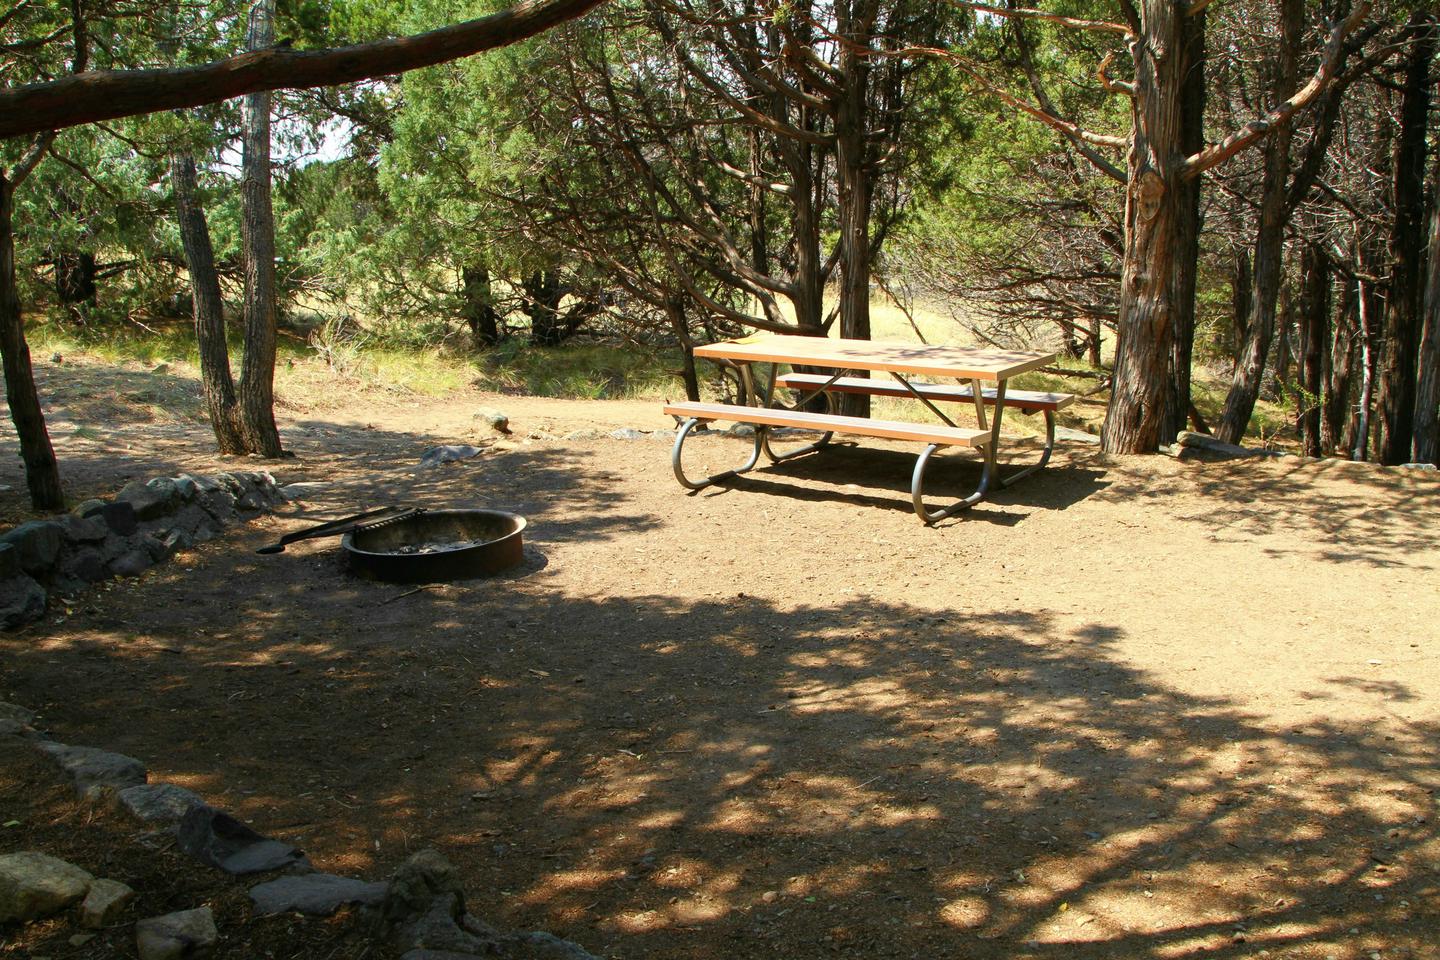 Closer view of Site #53 tent site with fire ring and picnic tableSite #53, Pinon Flats Campground